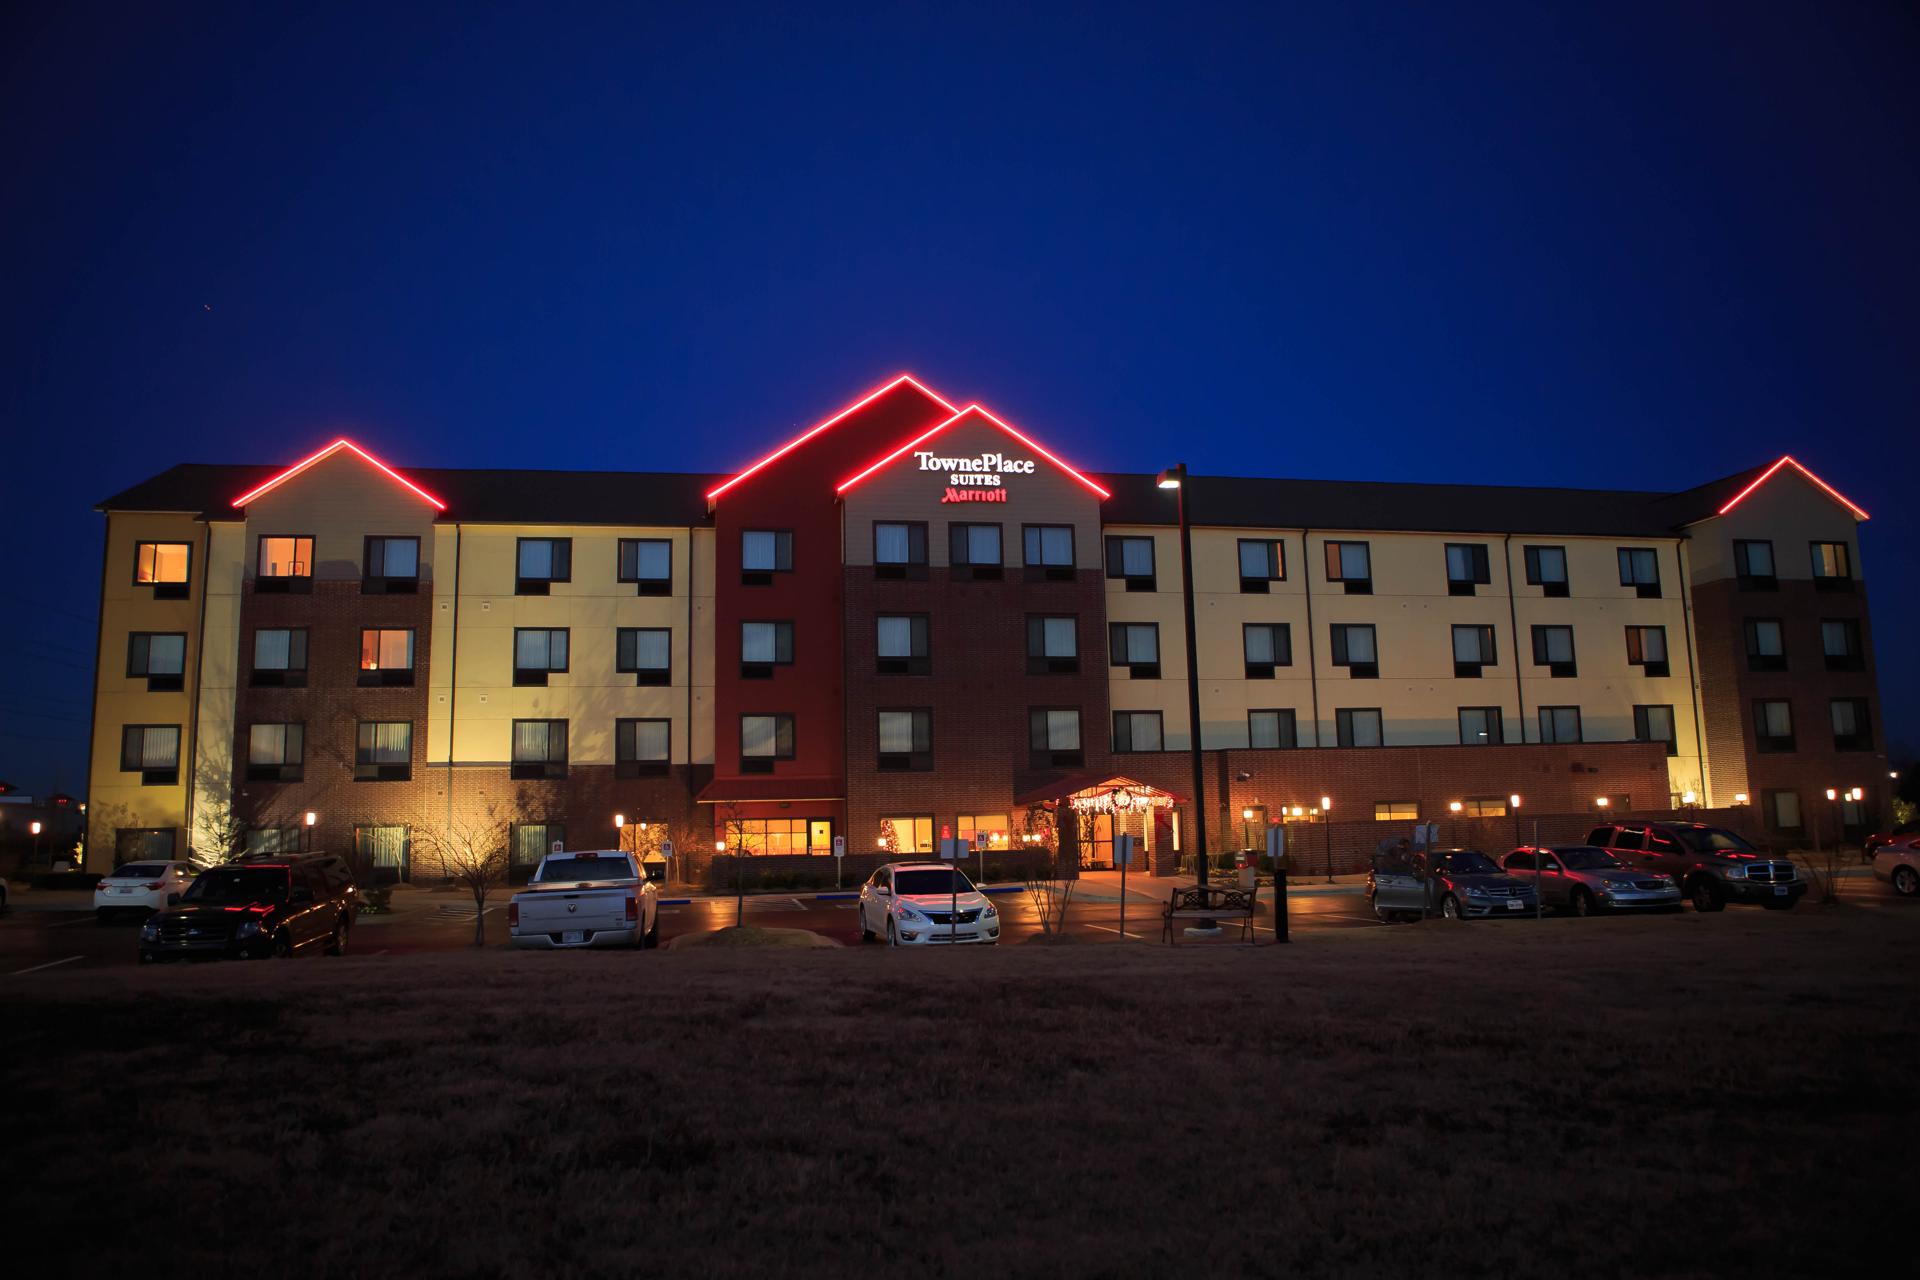 Towne Place Suites - Red Laser